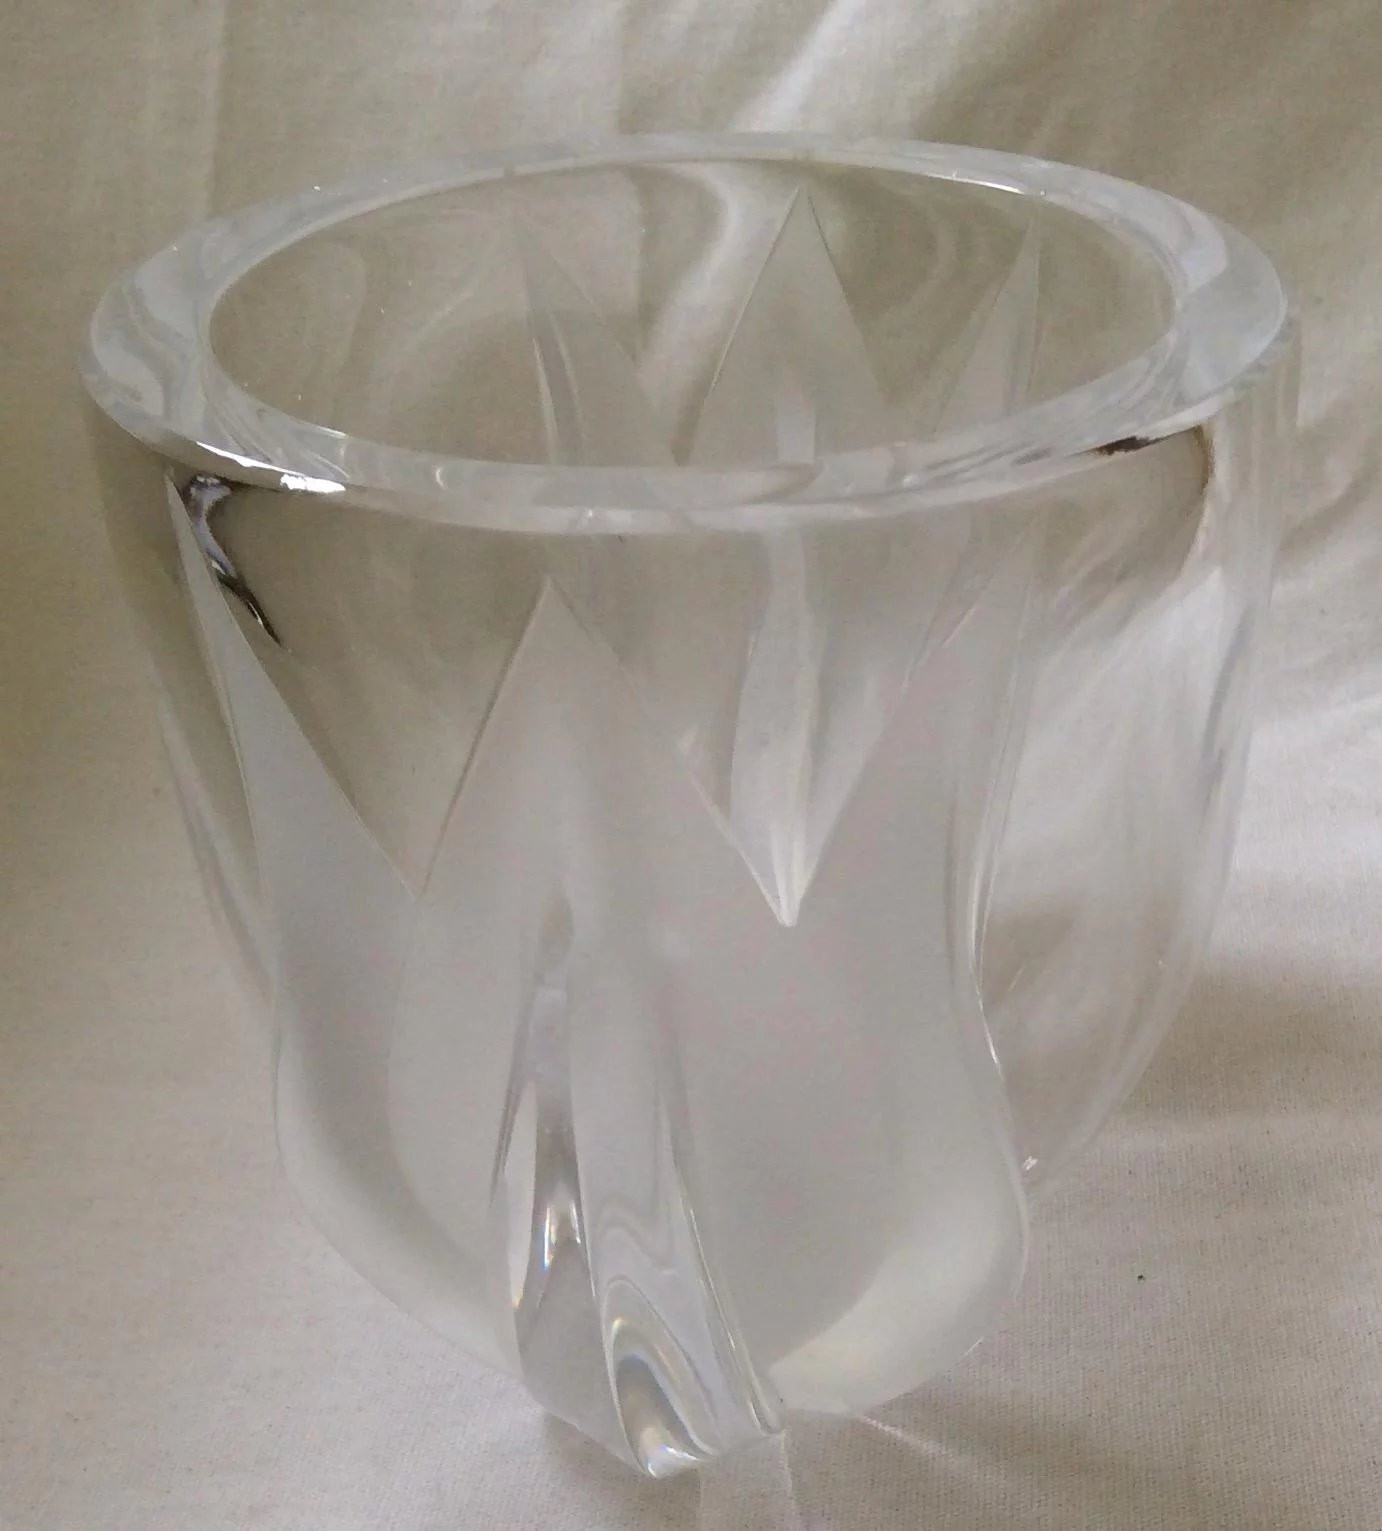 lalique dampierre vase of lalique deux tulipes two tulips crystal vase mint condition within click to expand